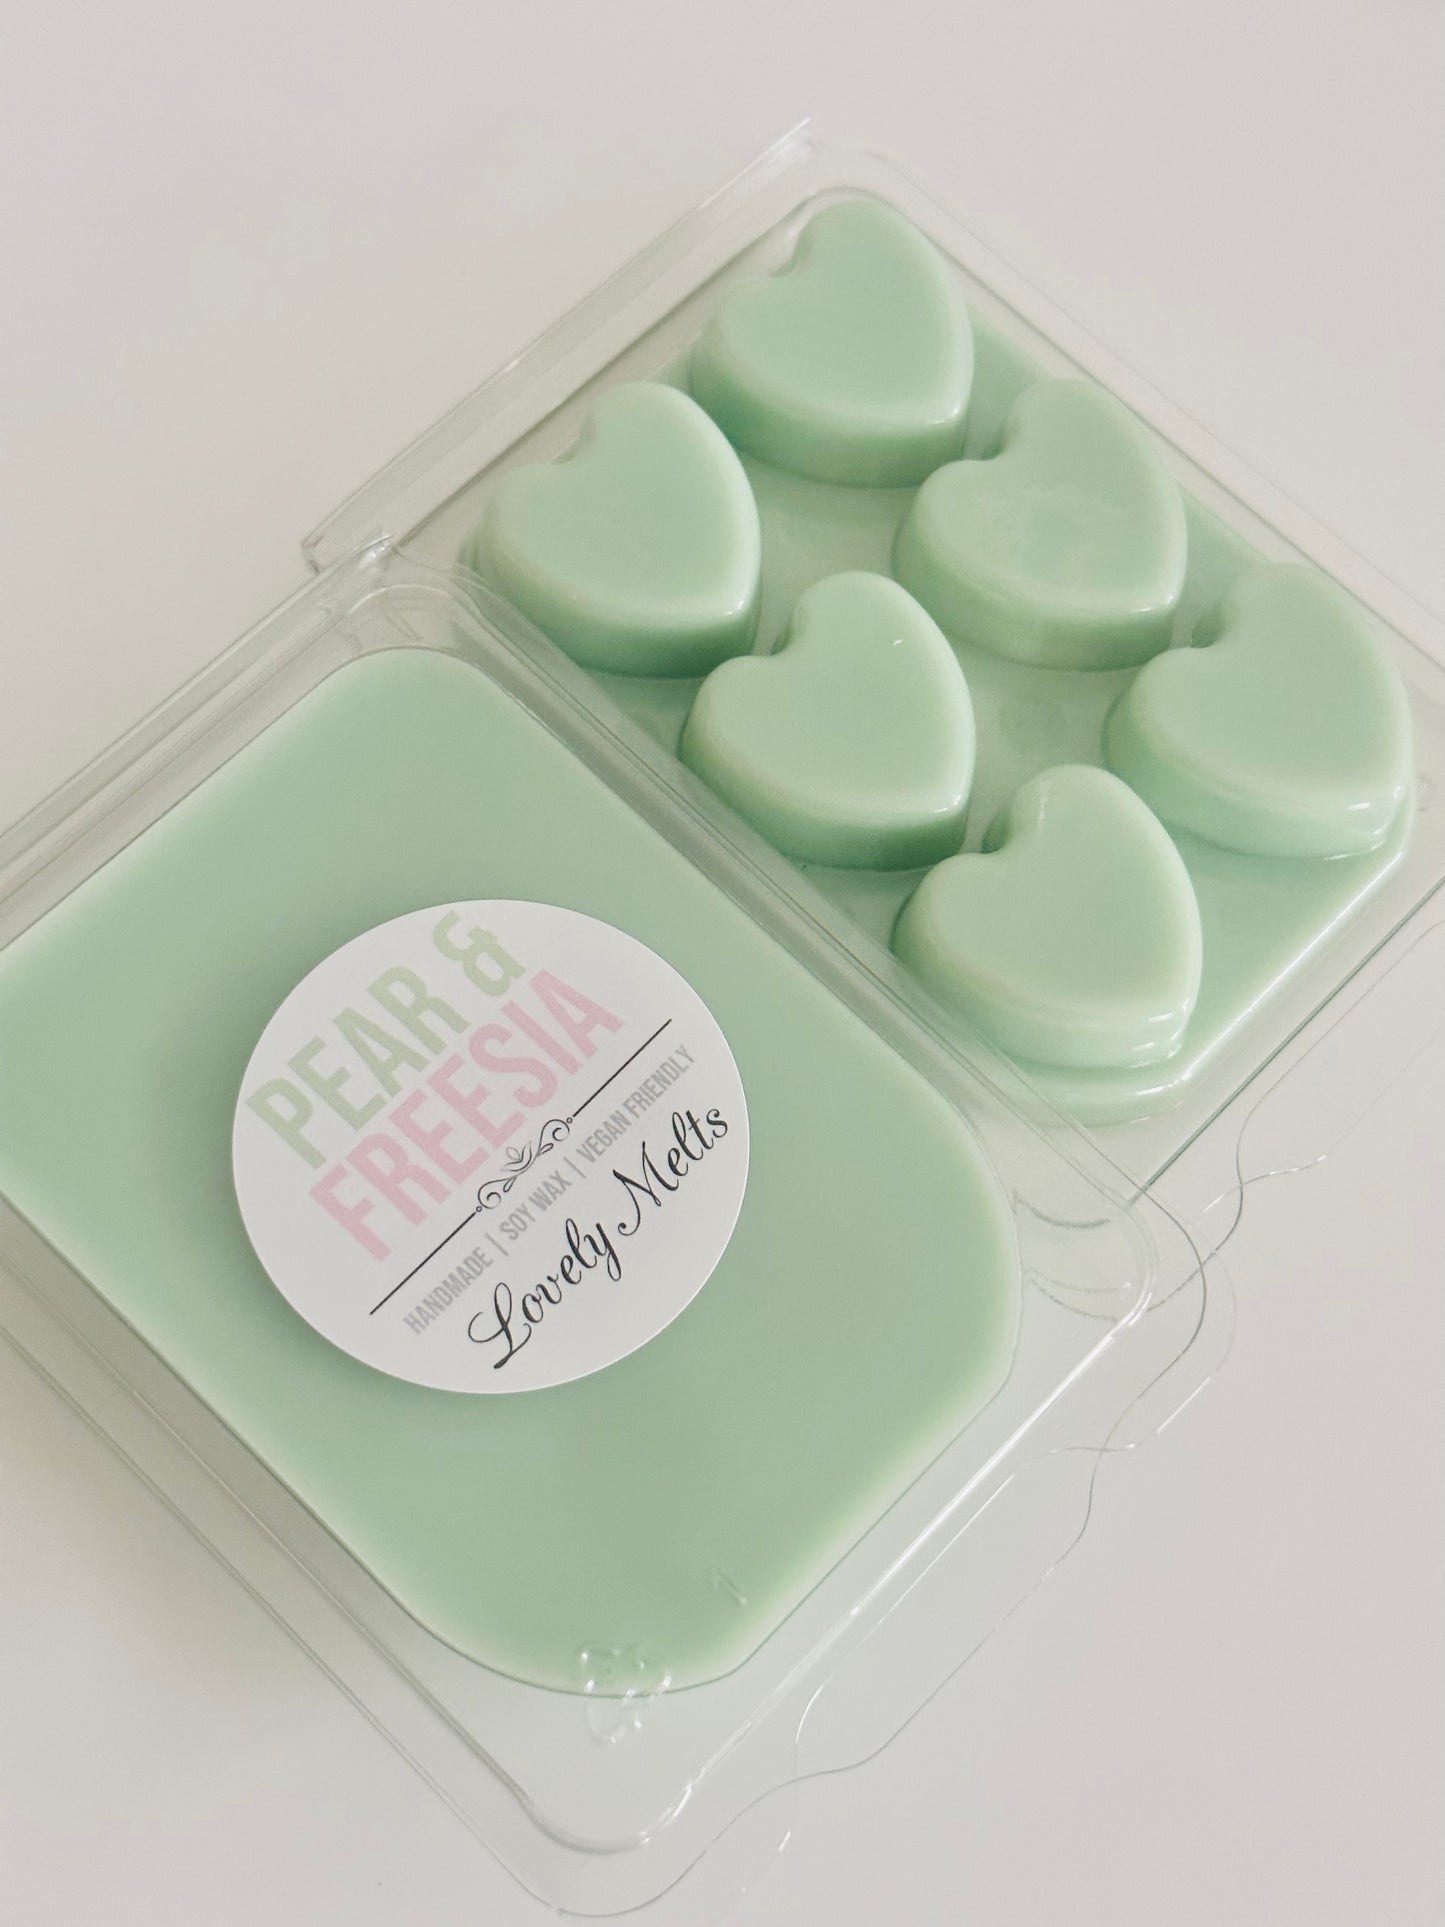 pear and freesia soy wax melts uk